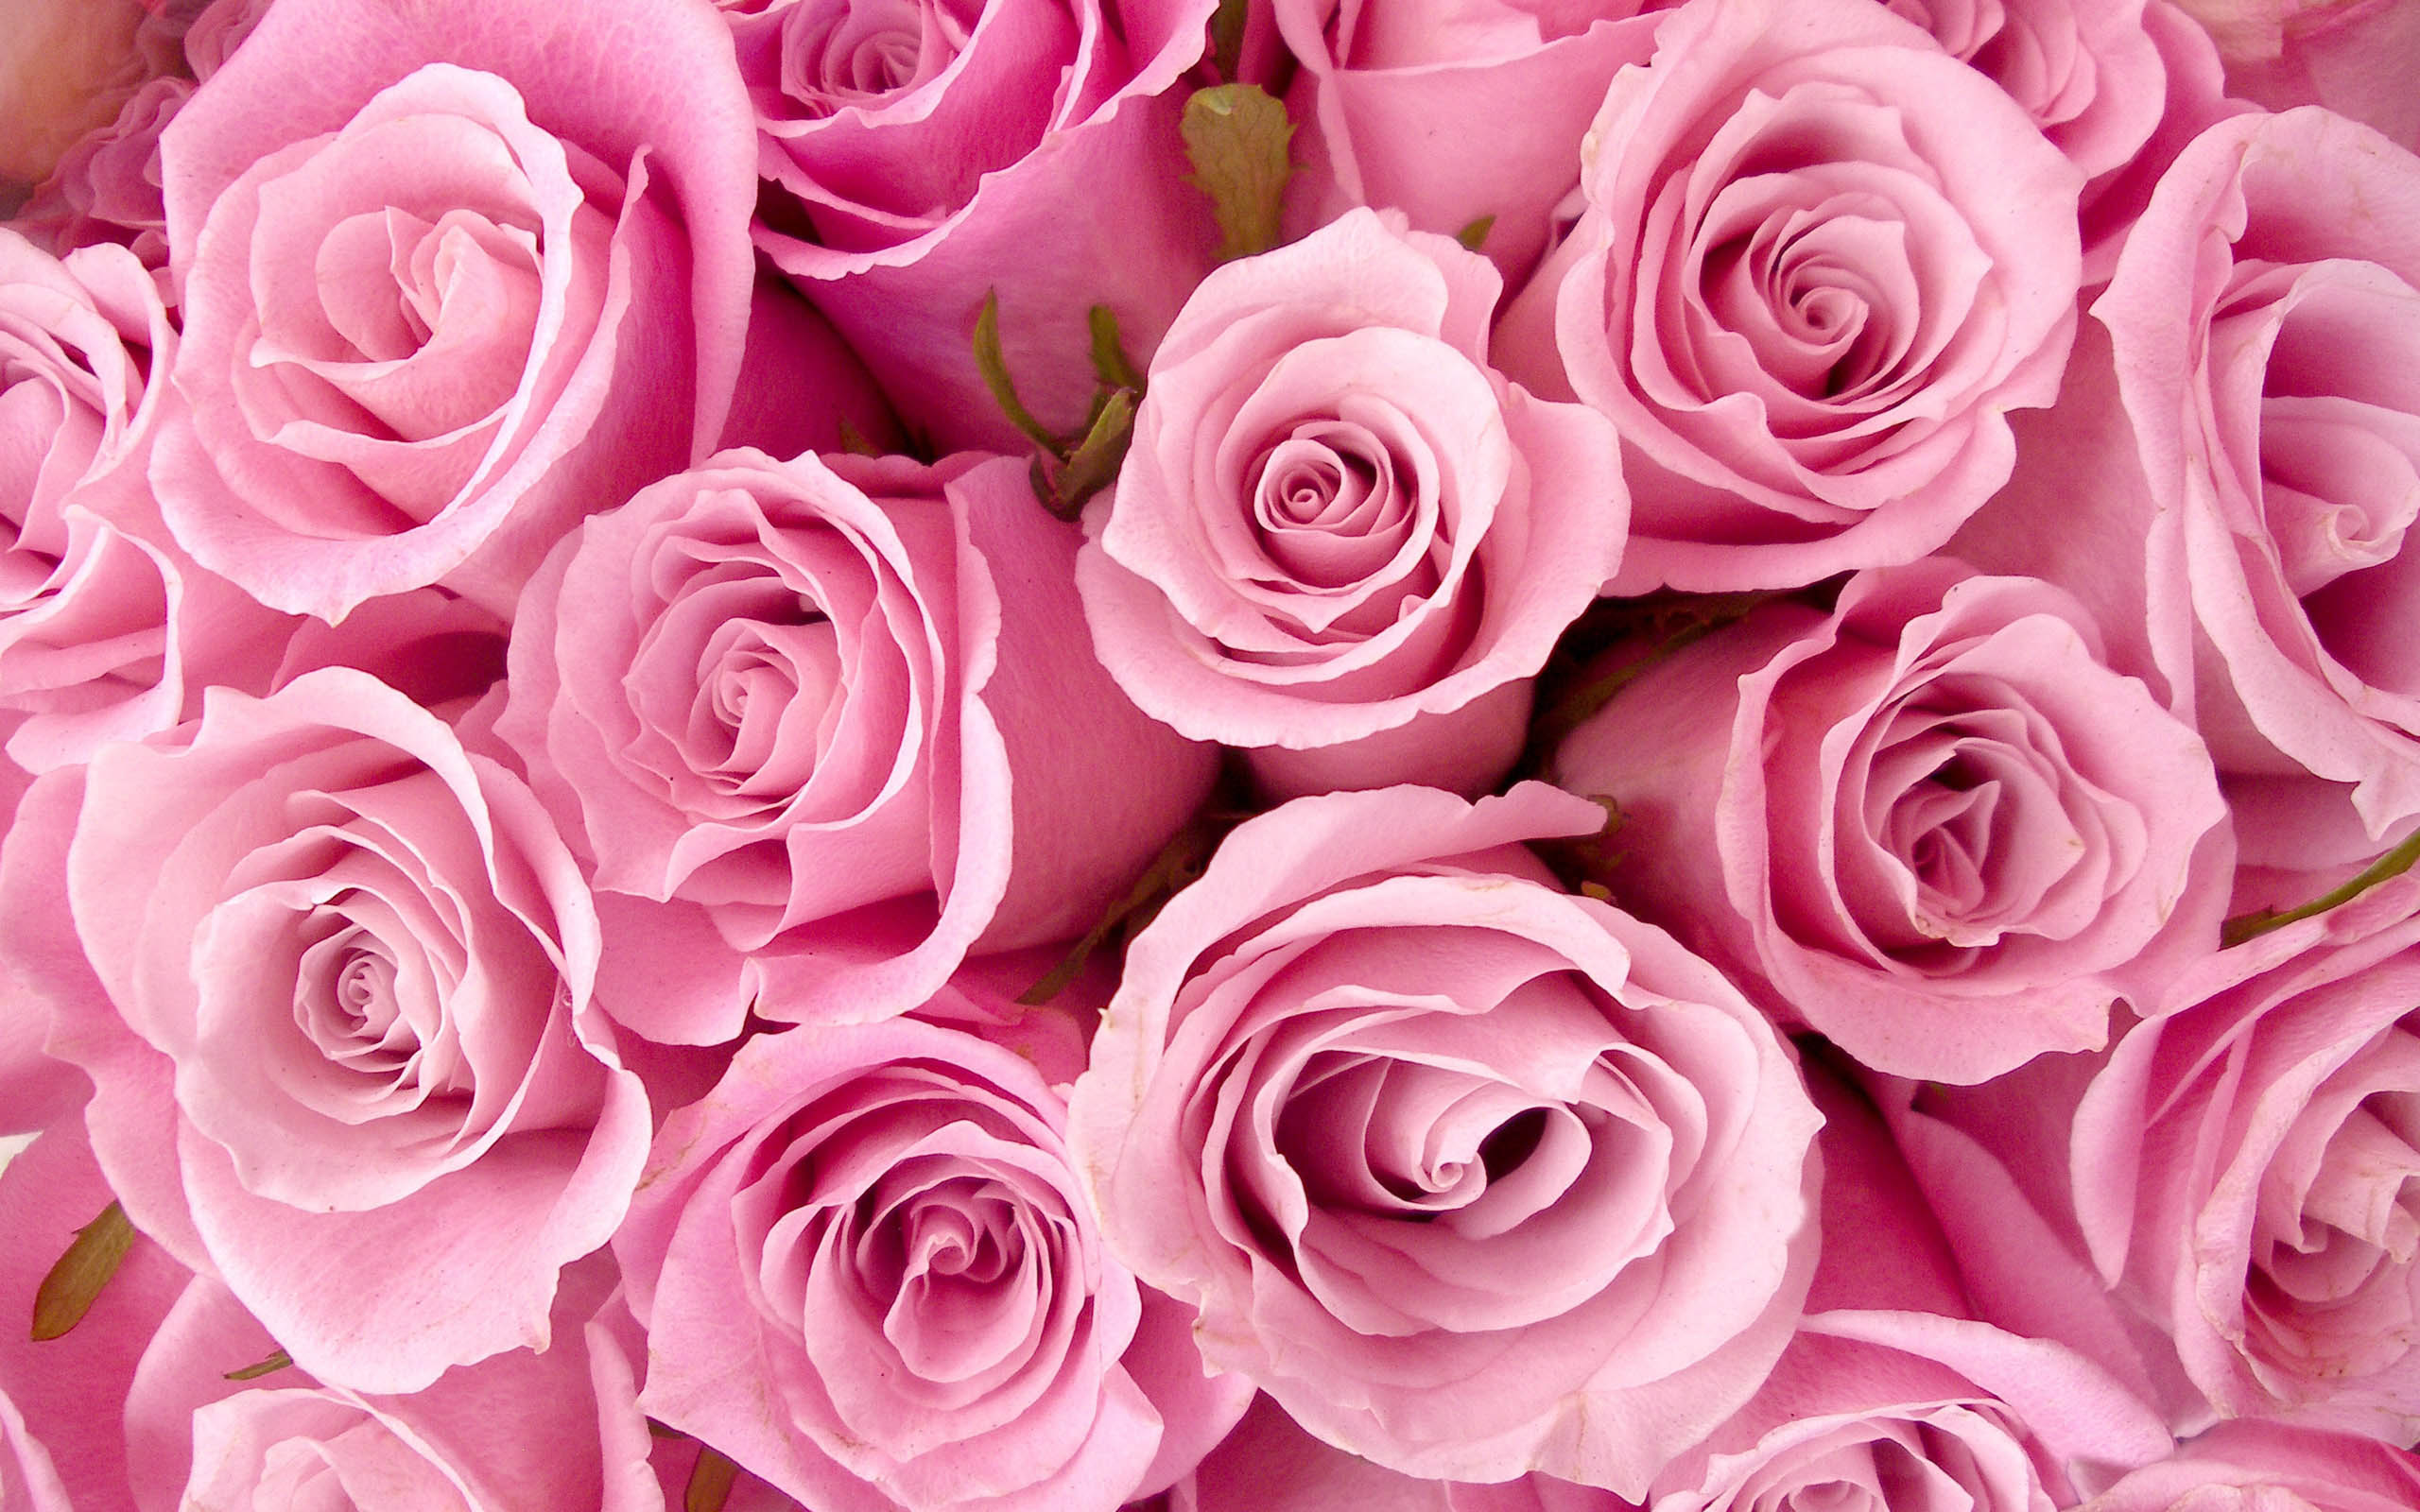 Scenery Wallpaper Includes Special Pink Roses Making Your